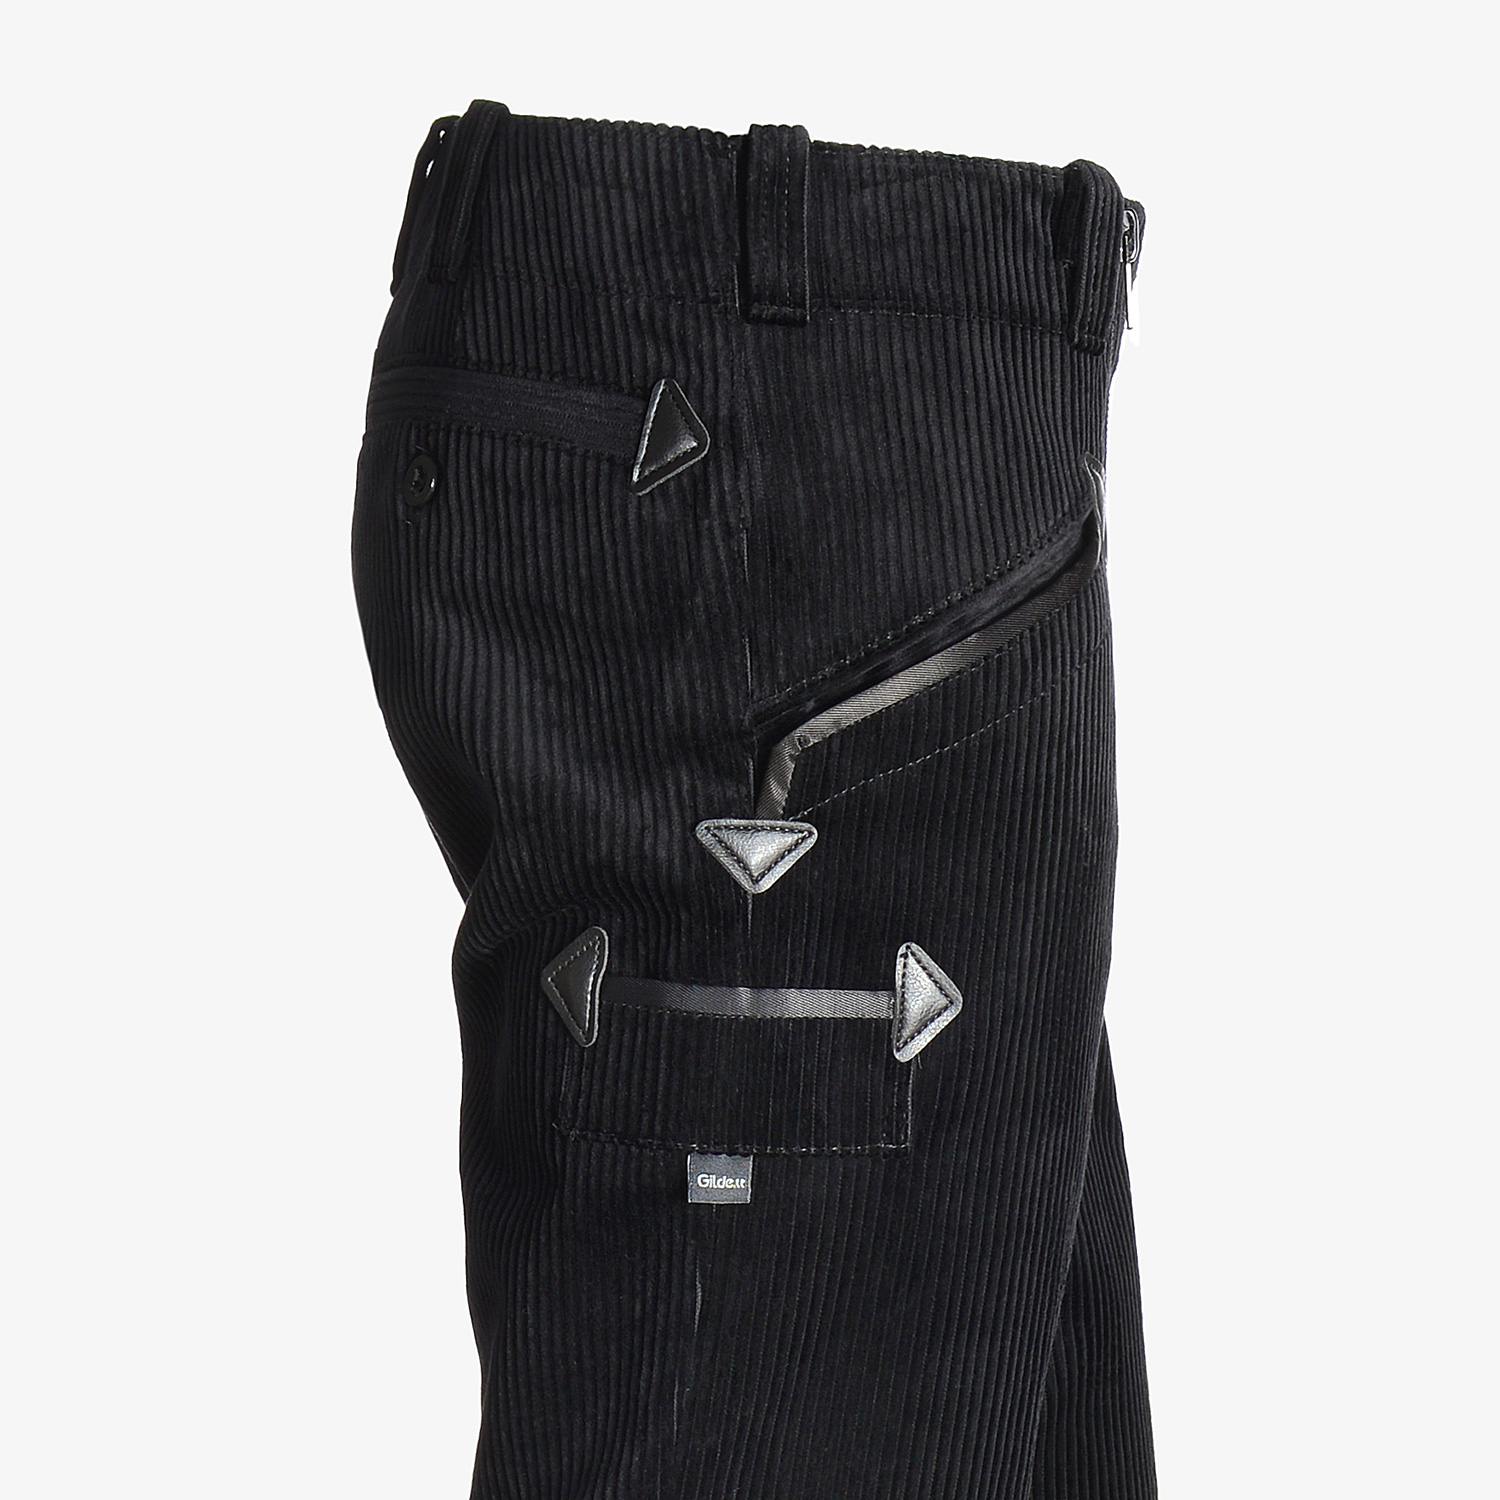 FELIX guild trousers corduroy without bell bottom